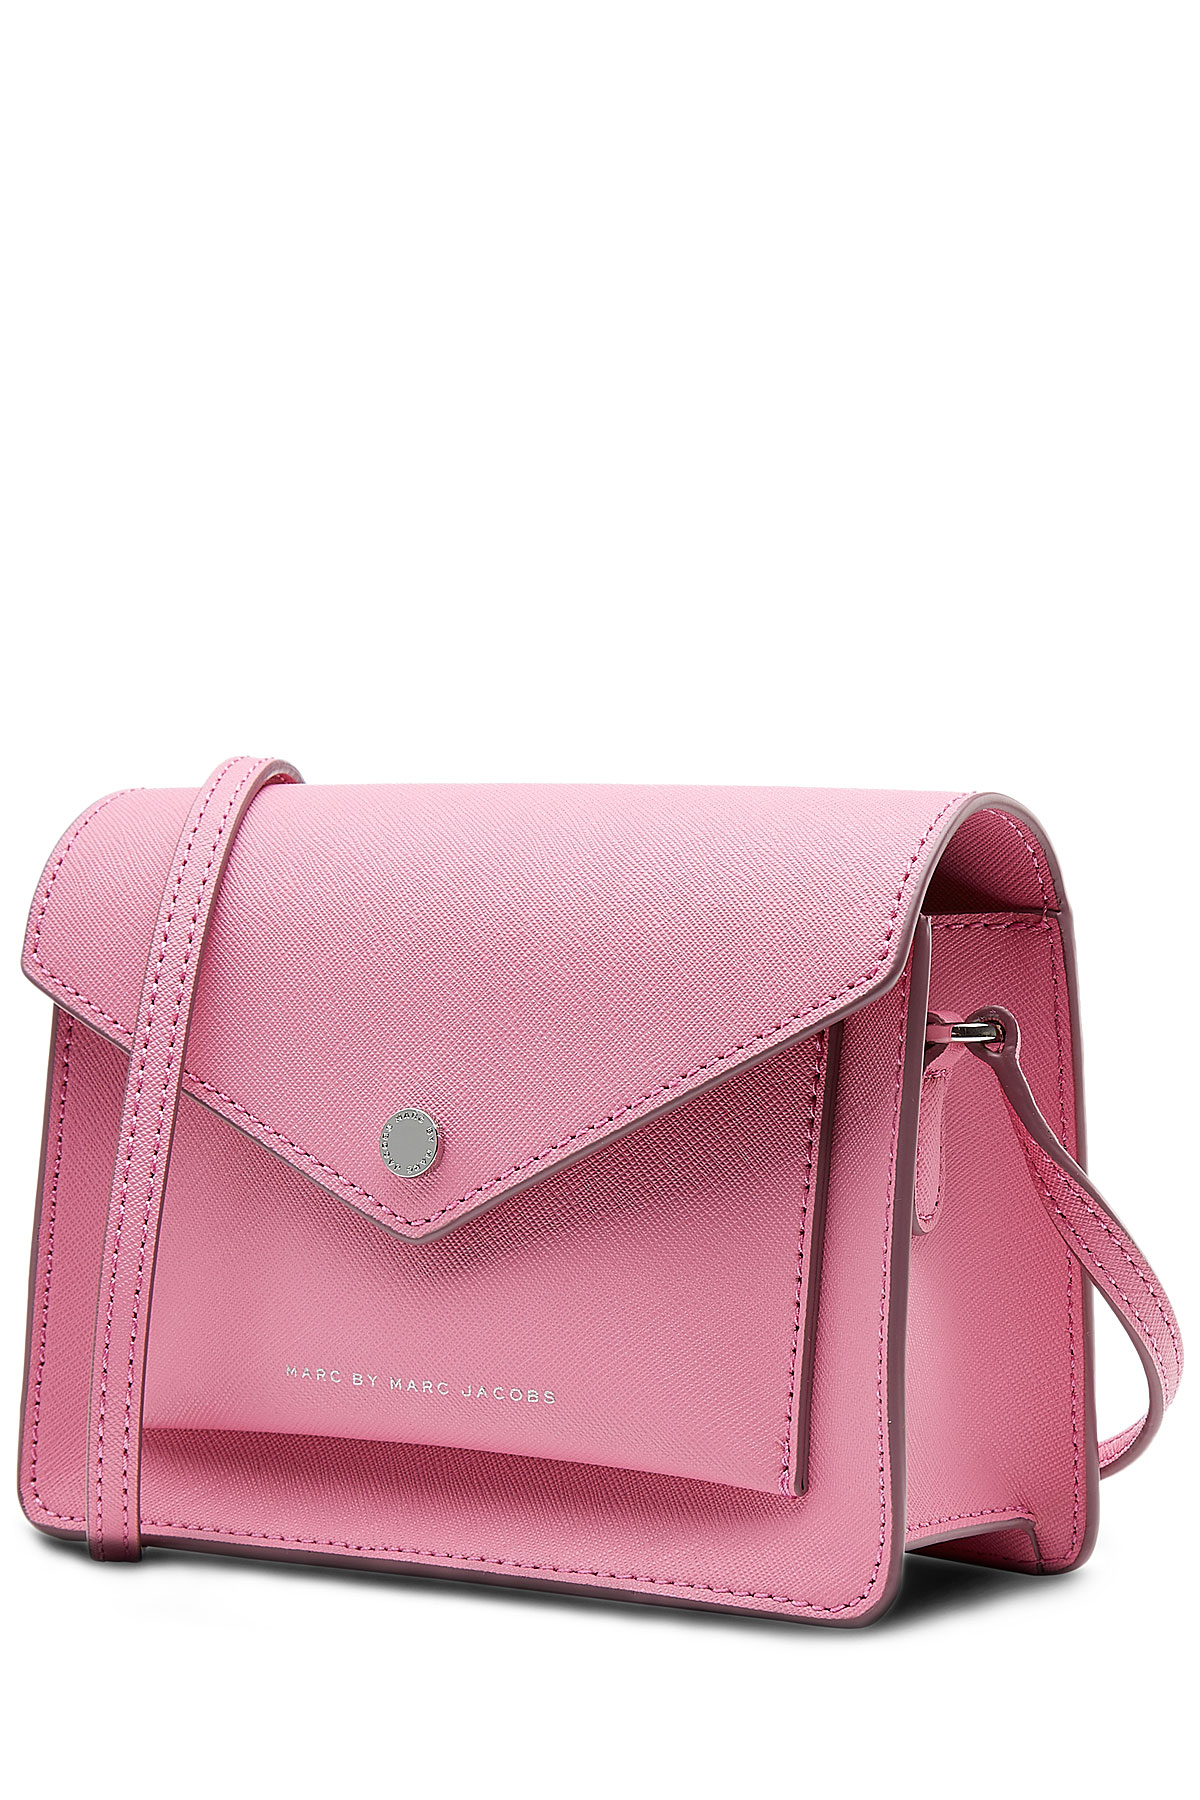 Lyst - Marc By Marc Jacobs Leather Shoulder Bag - Pink in Pink